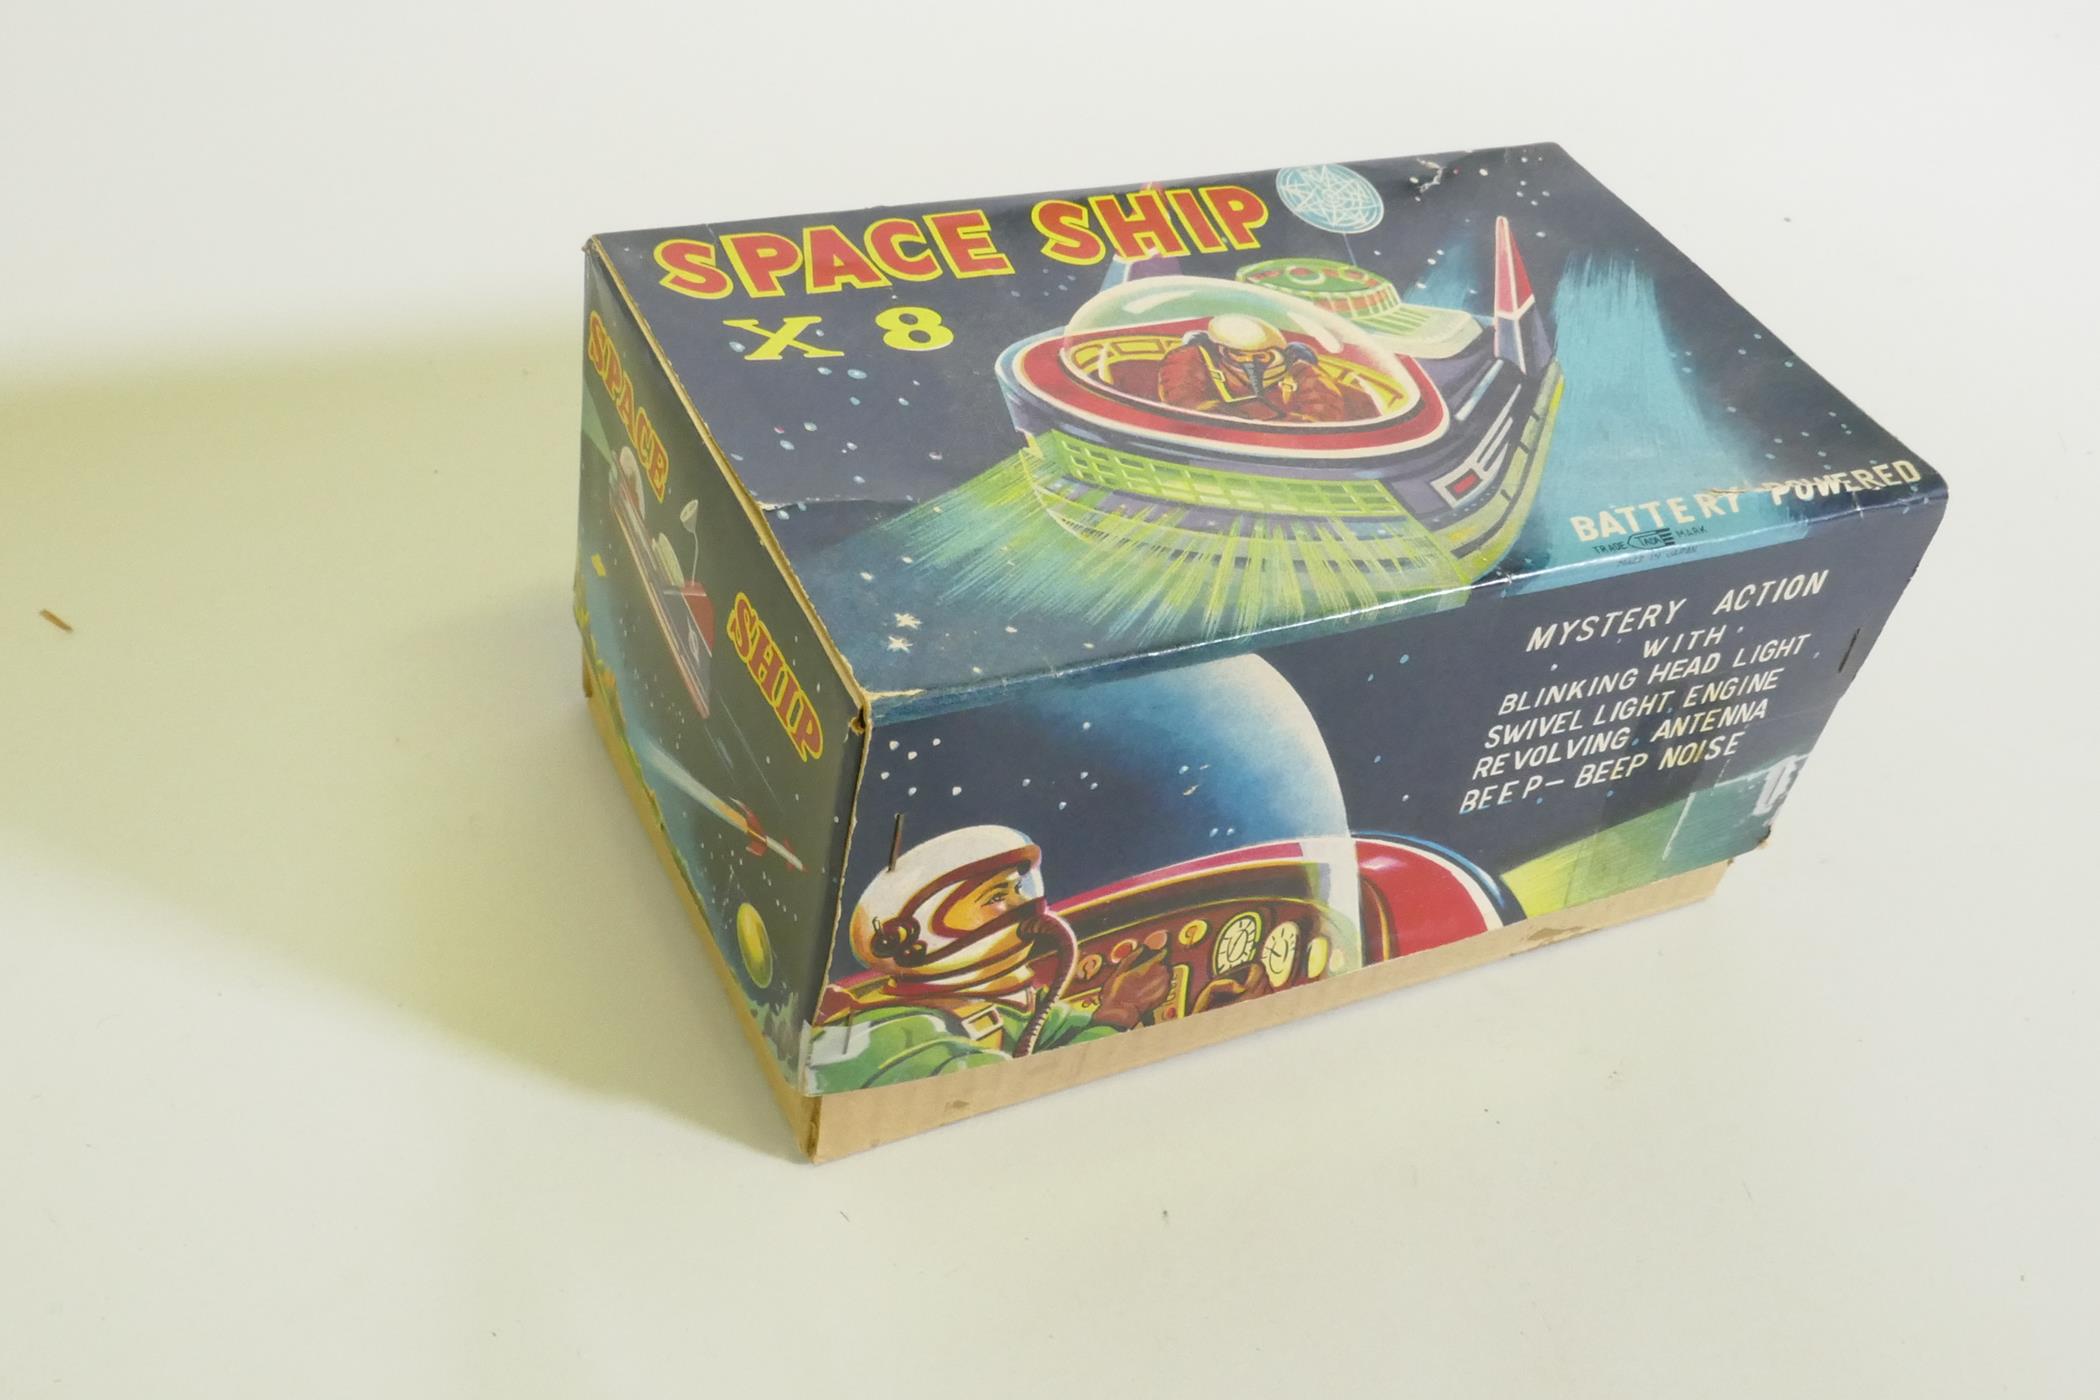 A 1960s Tada Japanese tin plate toy, Spaceship X-8, in original box, fine condition - Image 5 of 5